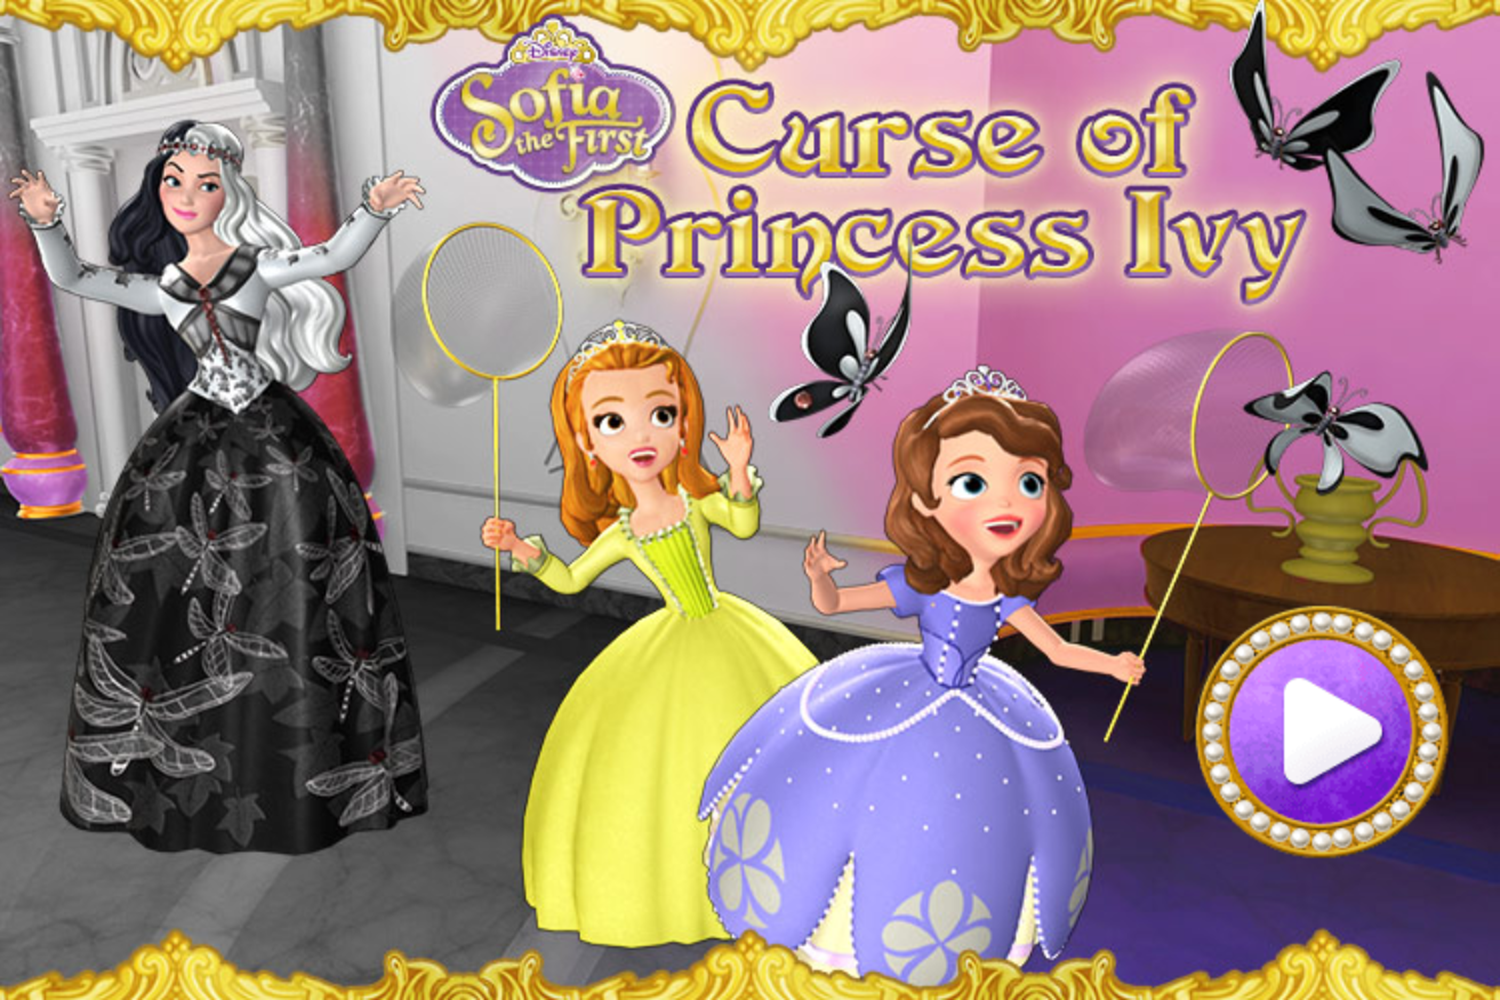 Sofia the First Curse of Princess Ivy Game Welcome Screen Screenshot.